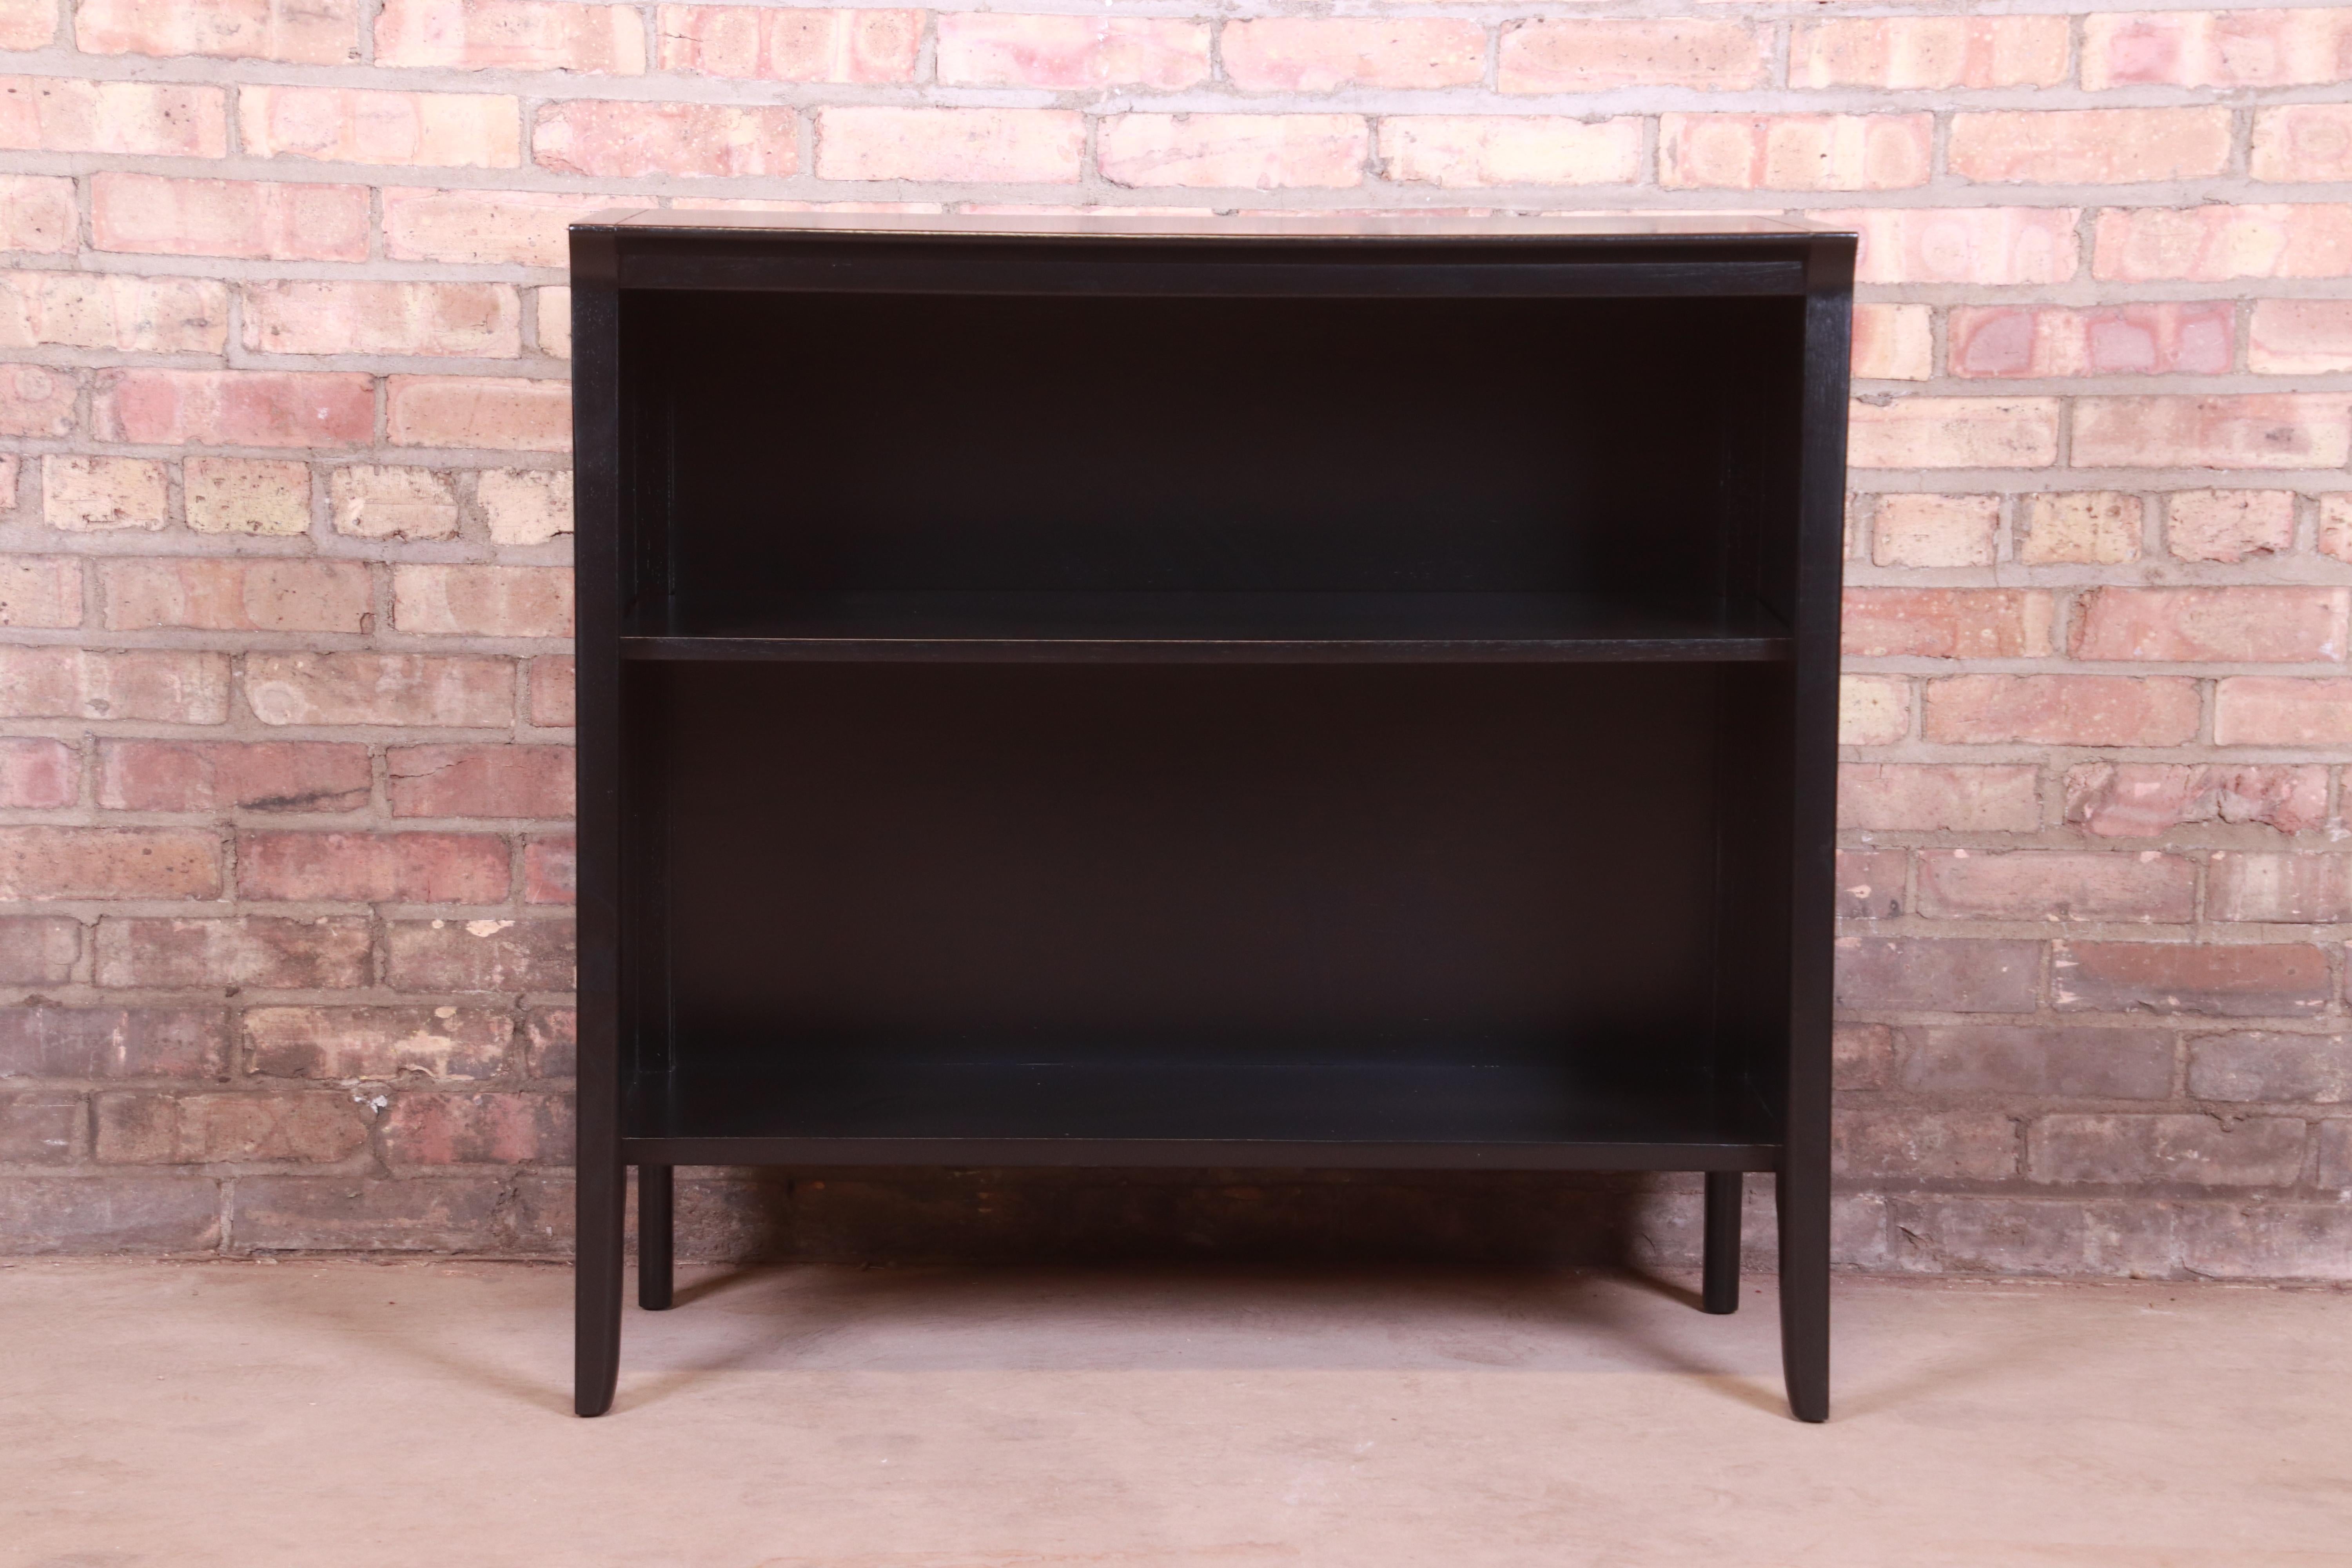 An exceptional Mid-Century Modern black lacquered walnut bookcase

By John Van Koert for Drexel 